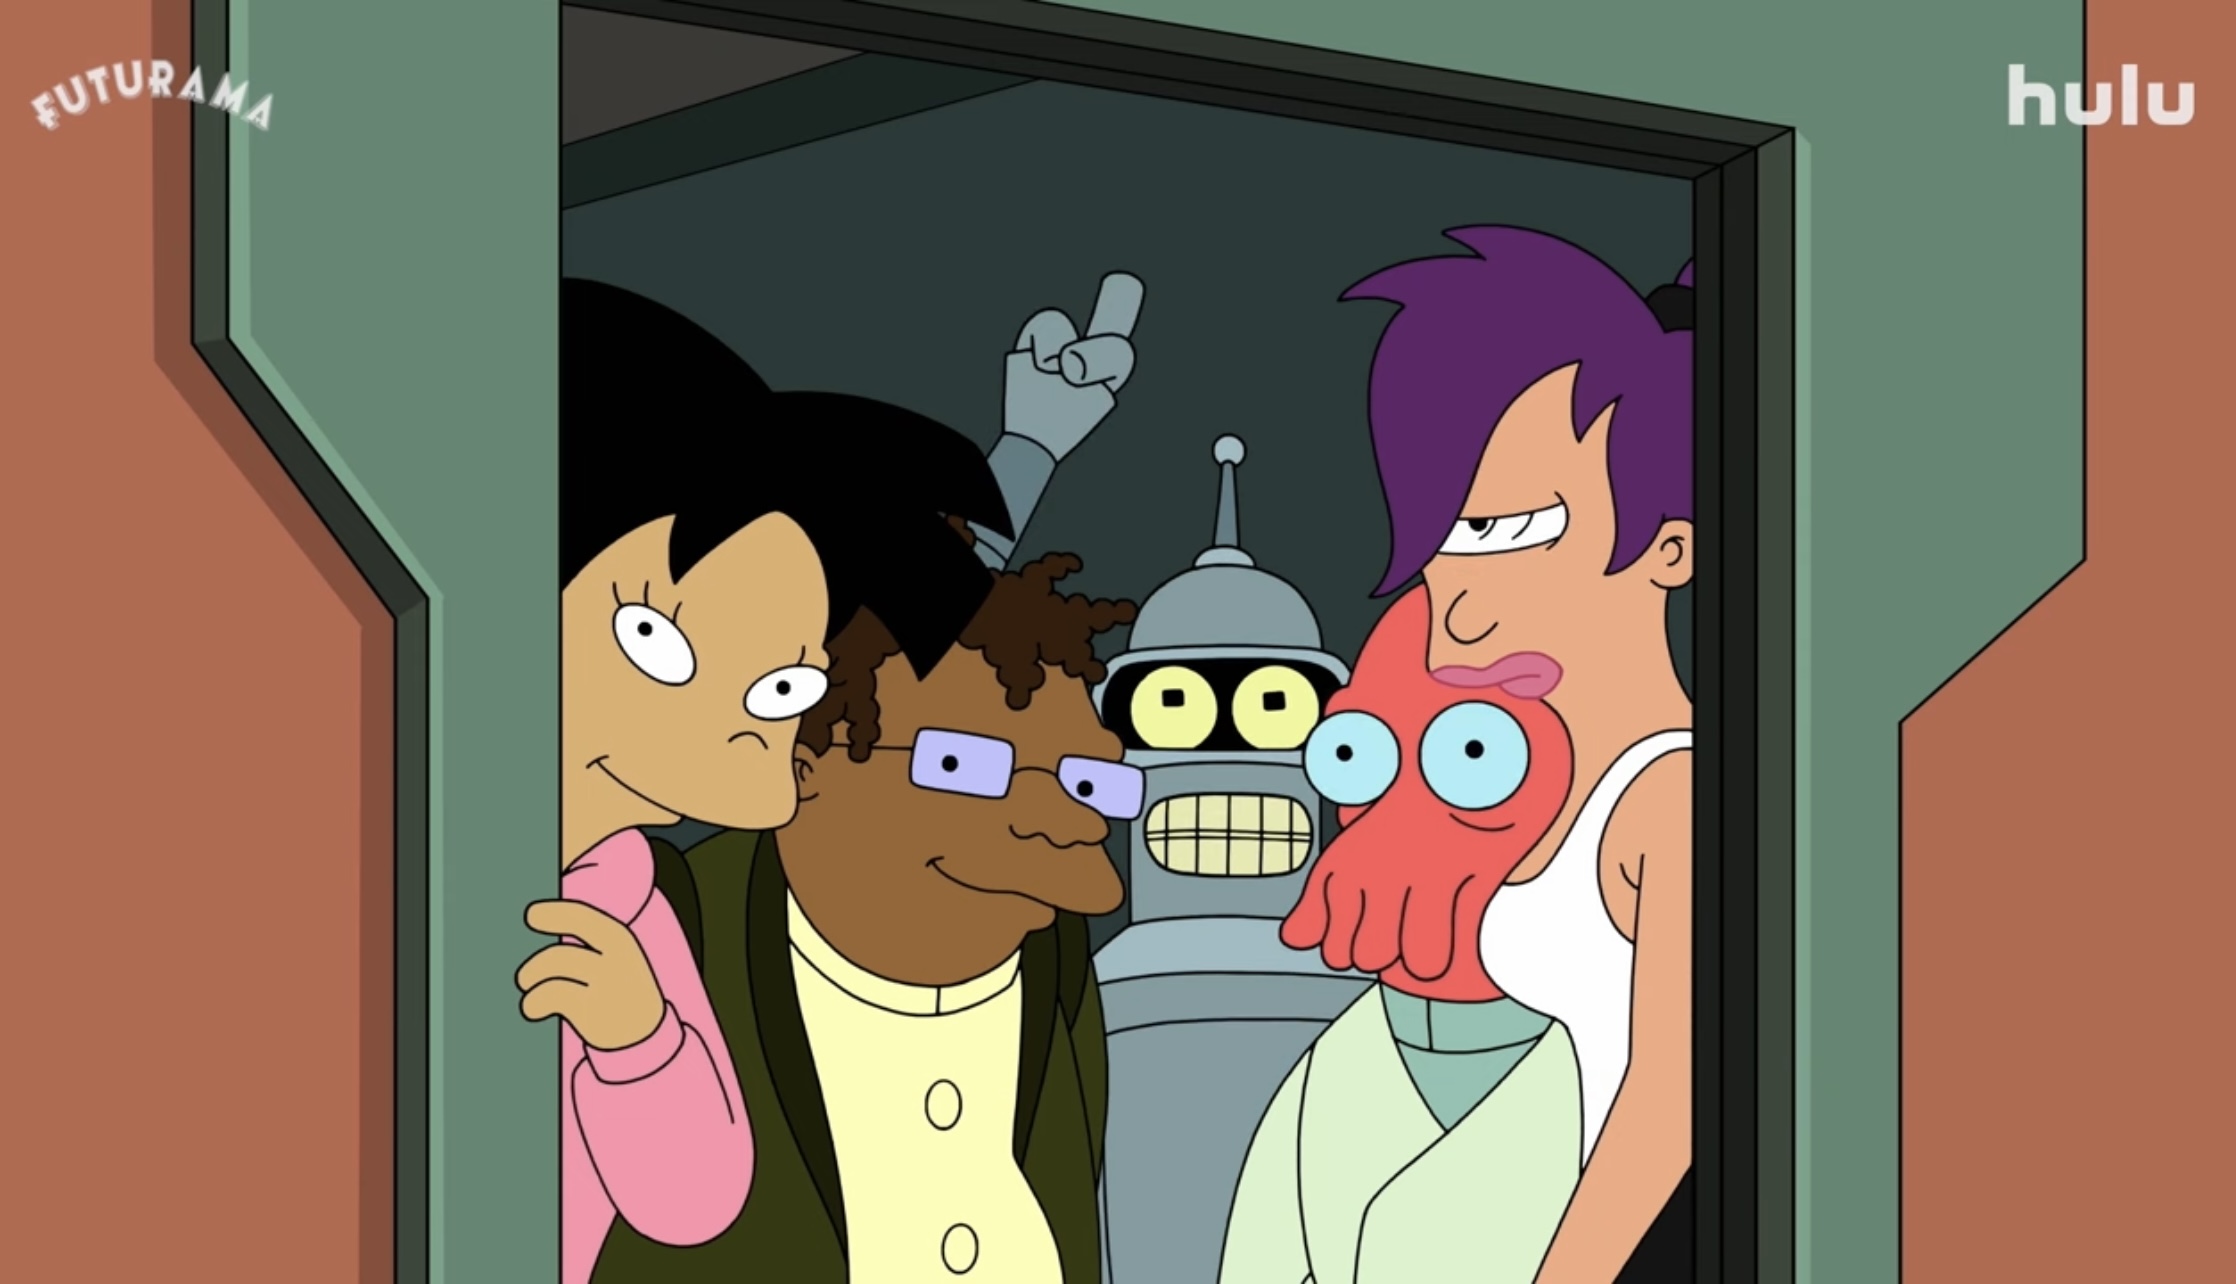 The Planet Express crew spies on someone on Futurama